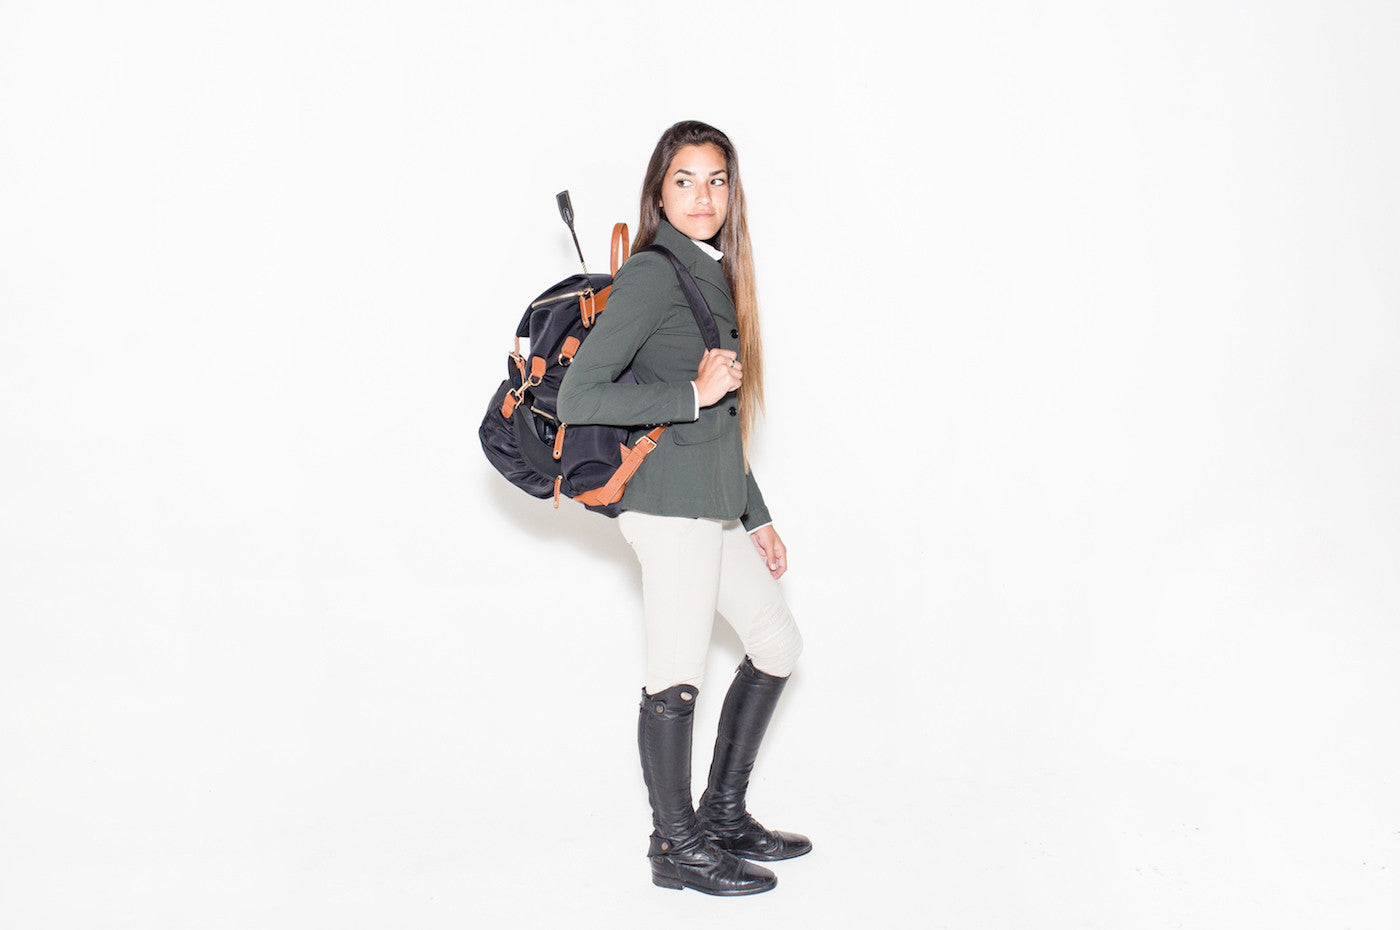 MaeLort Waterproof Technical Back Pack Limited Release - Luxe EQ